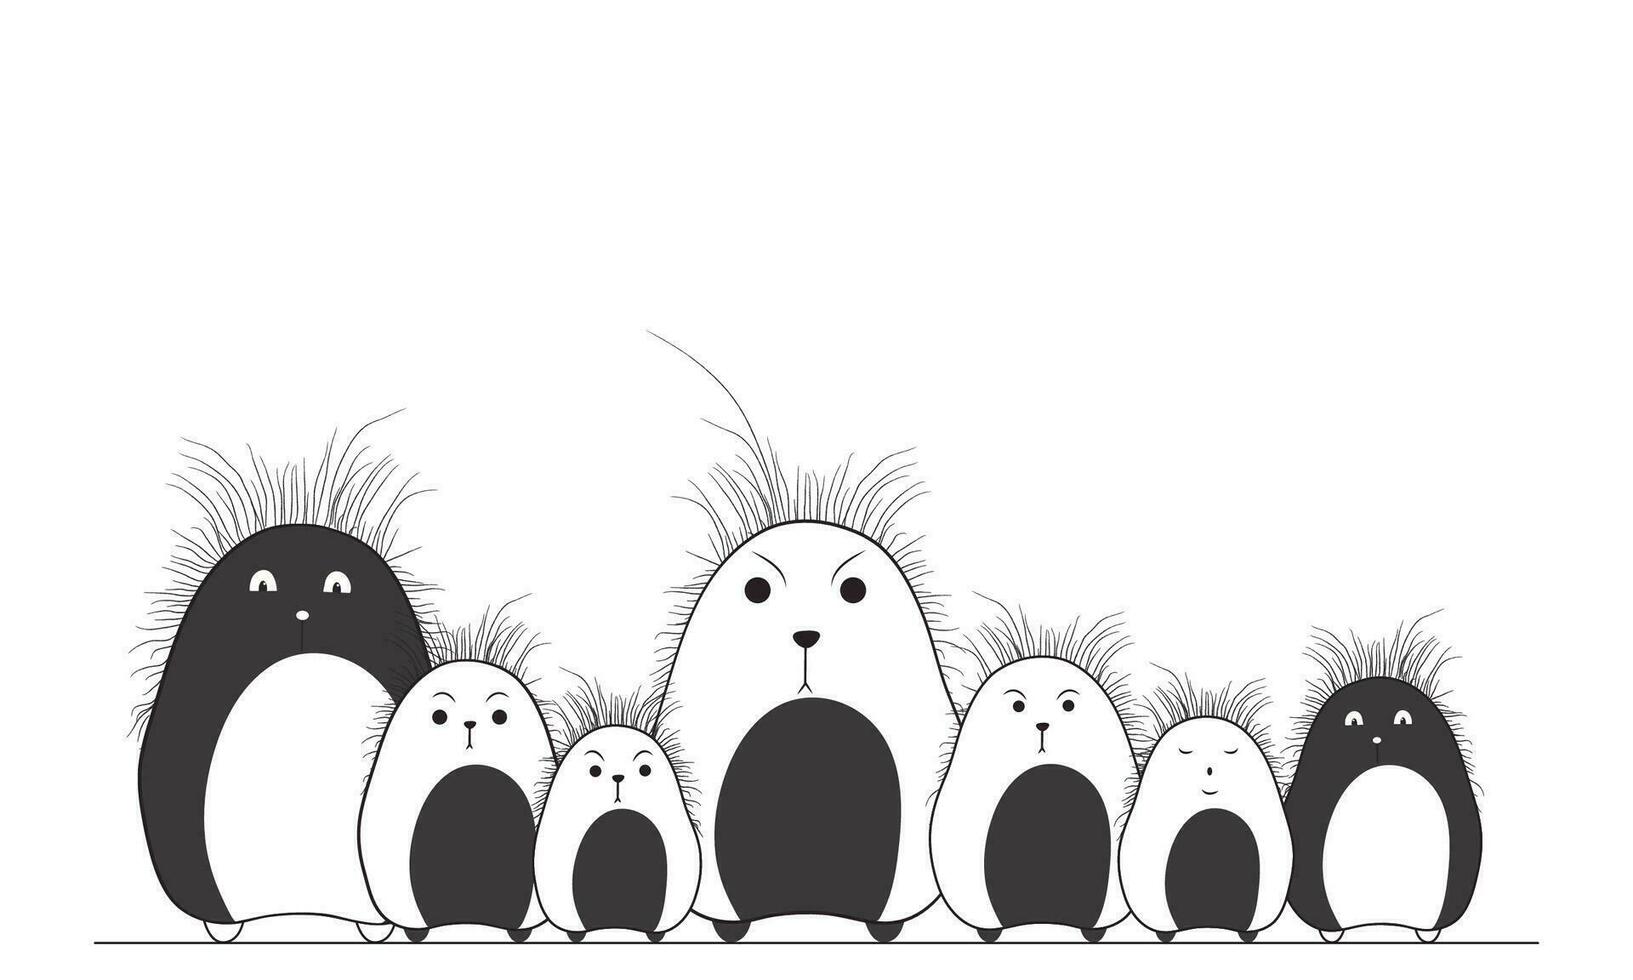 Black and White Cute Hedgehog Character Set in Standing Pose. vector